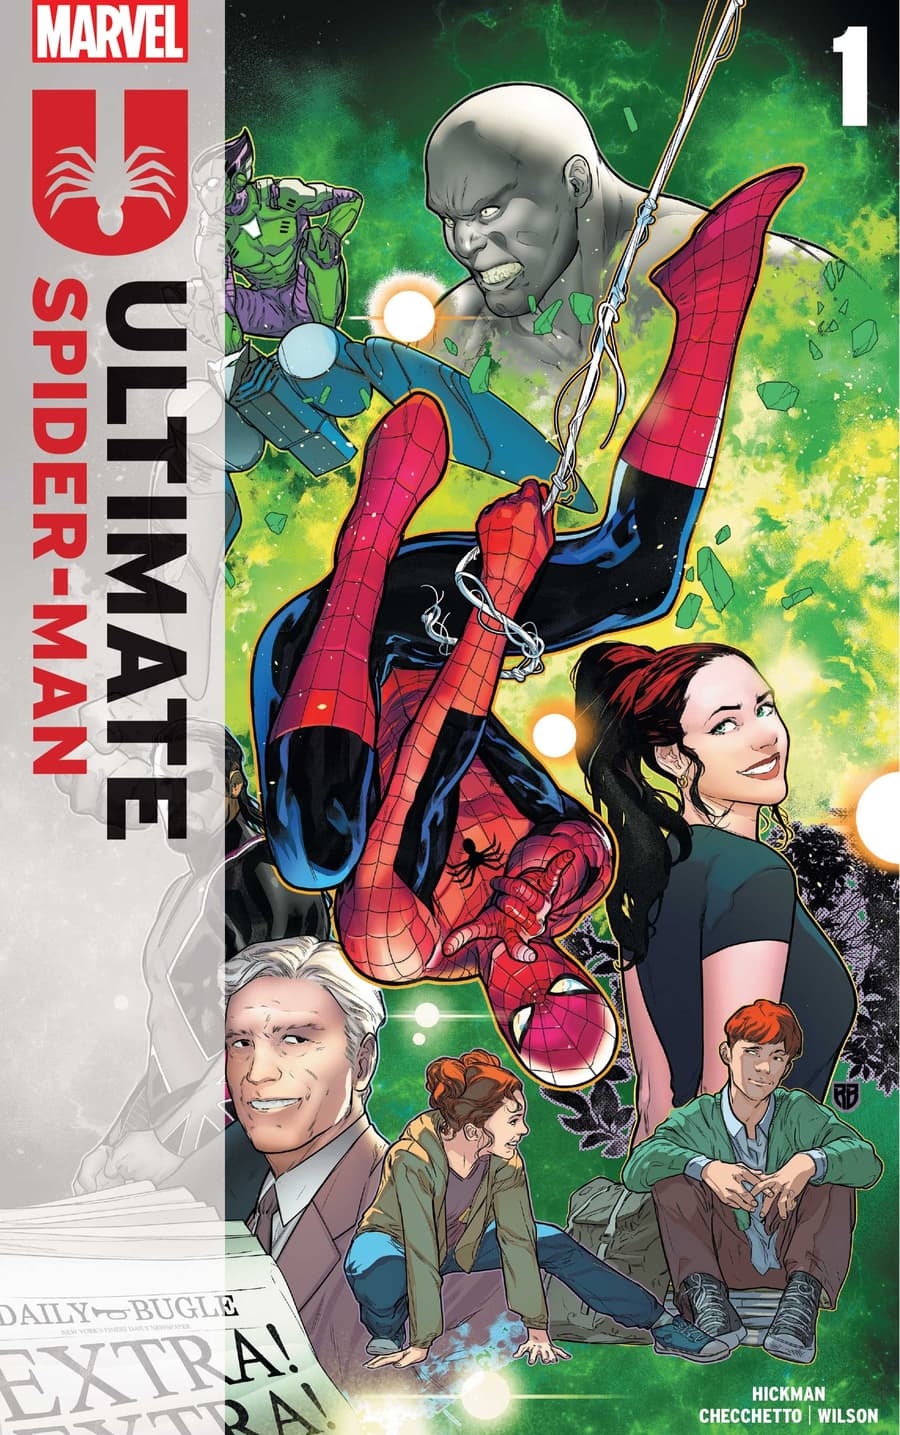 ULTIMATE SPIDER-MAN #1 Second Printing Variant Cover by R.B. Silva